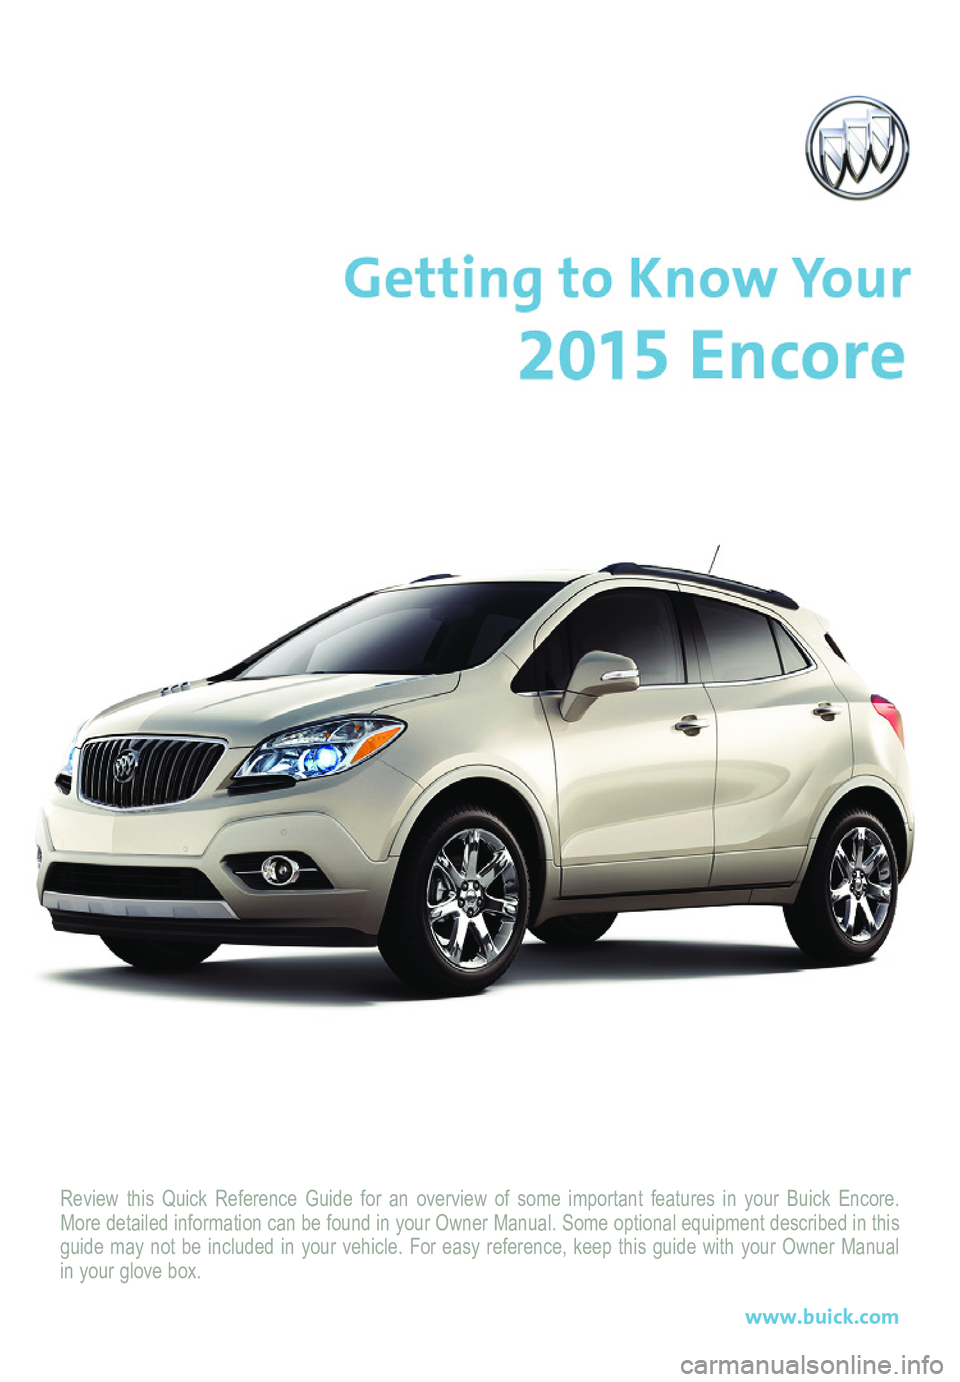 BUICK ENCORE 2015  Get To Know Guide Review this Quick Reference Guide for an overview of some important feat\
ures in your Buick Encore. More detailed information can be found in your Owner Manual. Some option\
al equipment described in